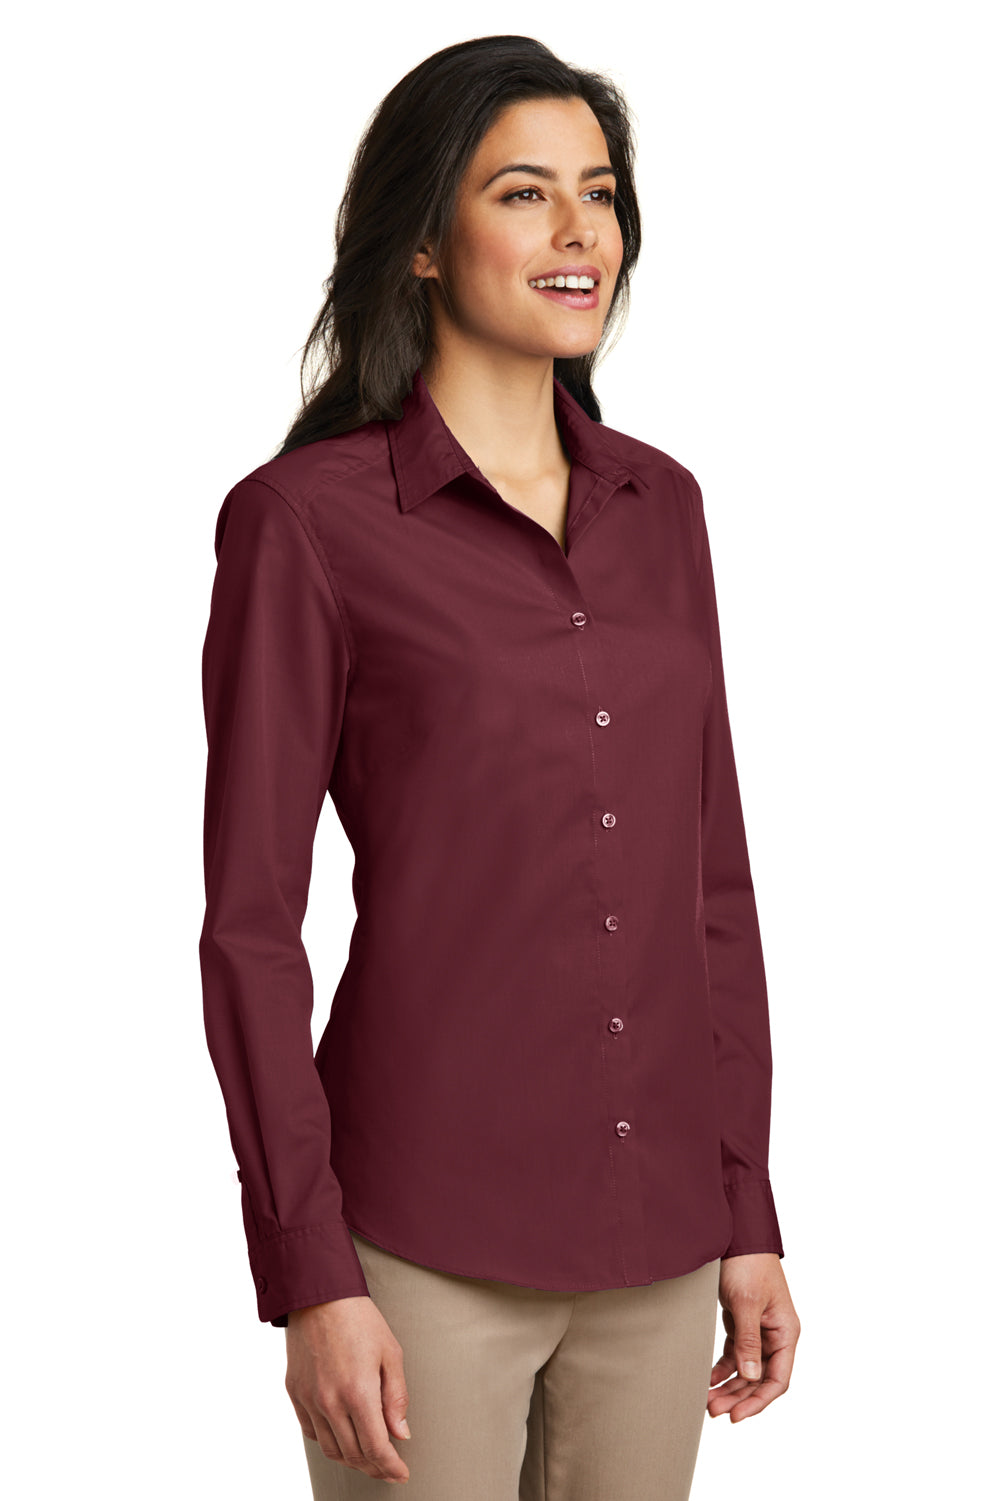 Port Authority LW100 Womens Carefree Stain Resistant Long Sleeve Button Down Shirt Burgundy 3Q